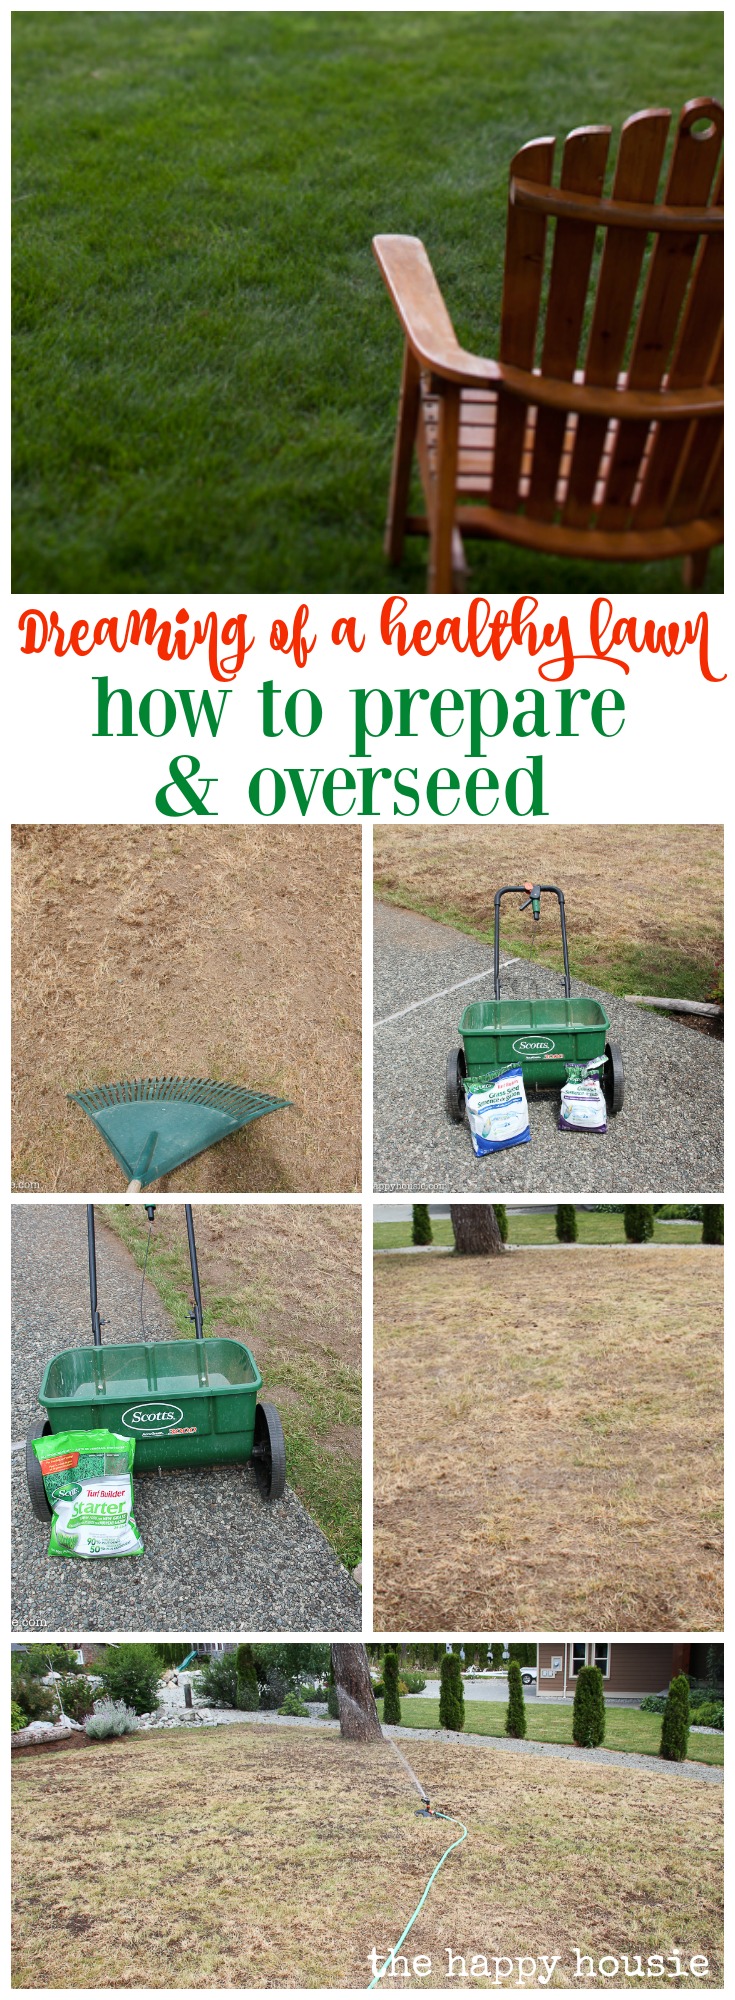 Dreaming of a healthy lawn how to prepare and overseed at the happy housie